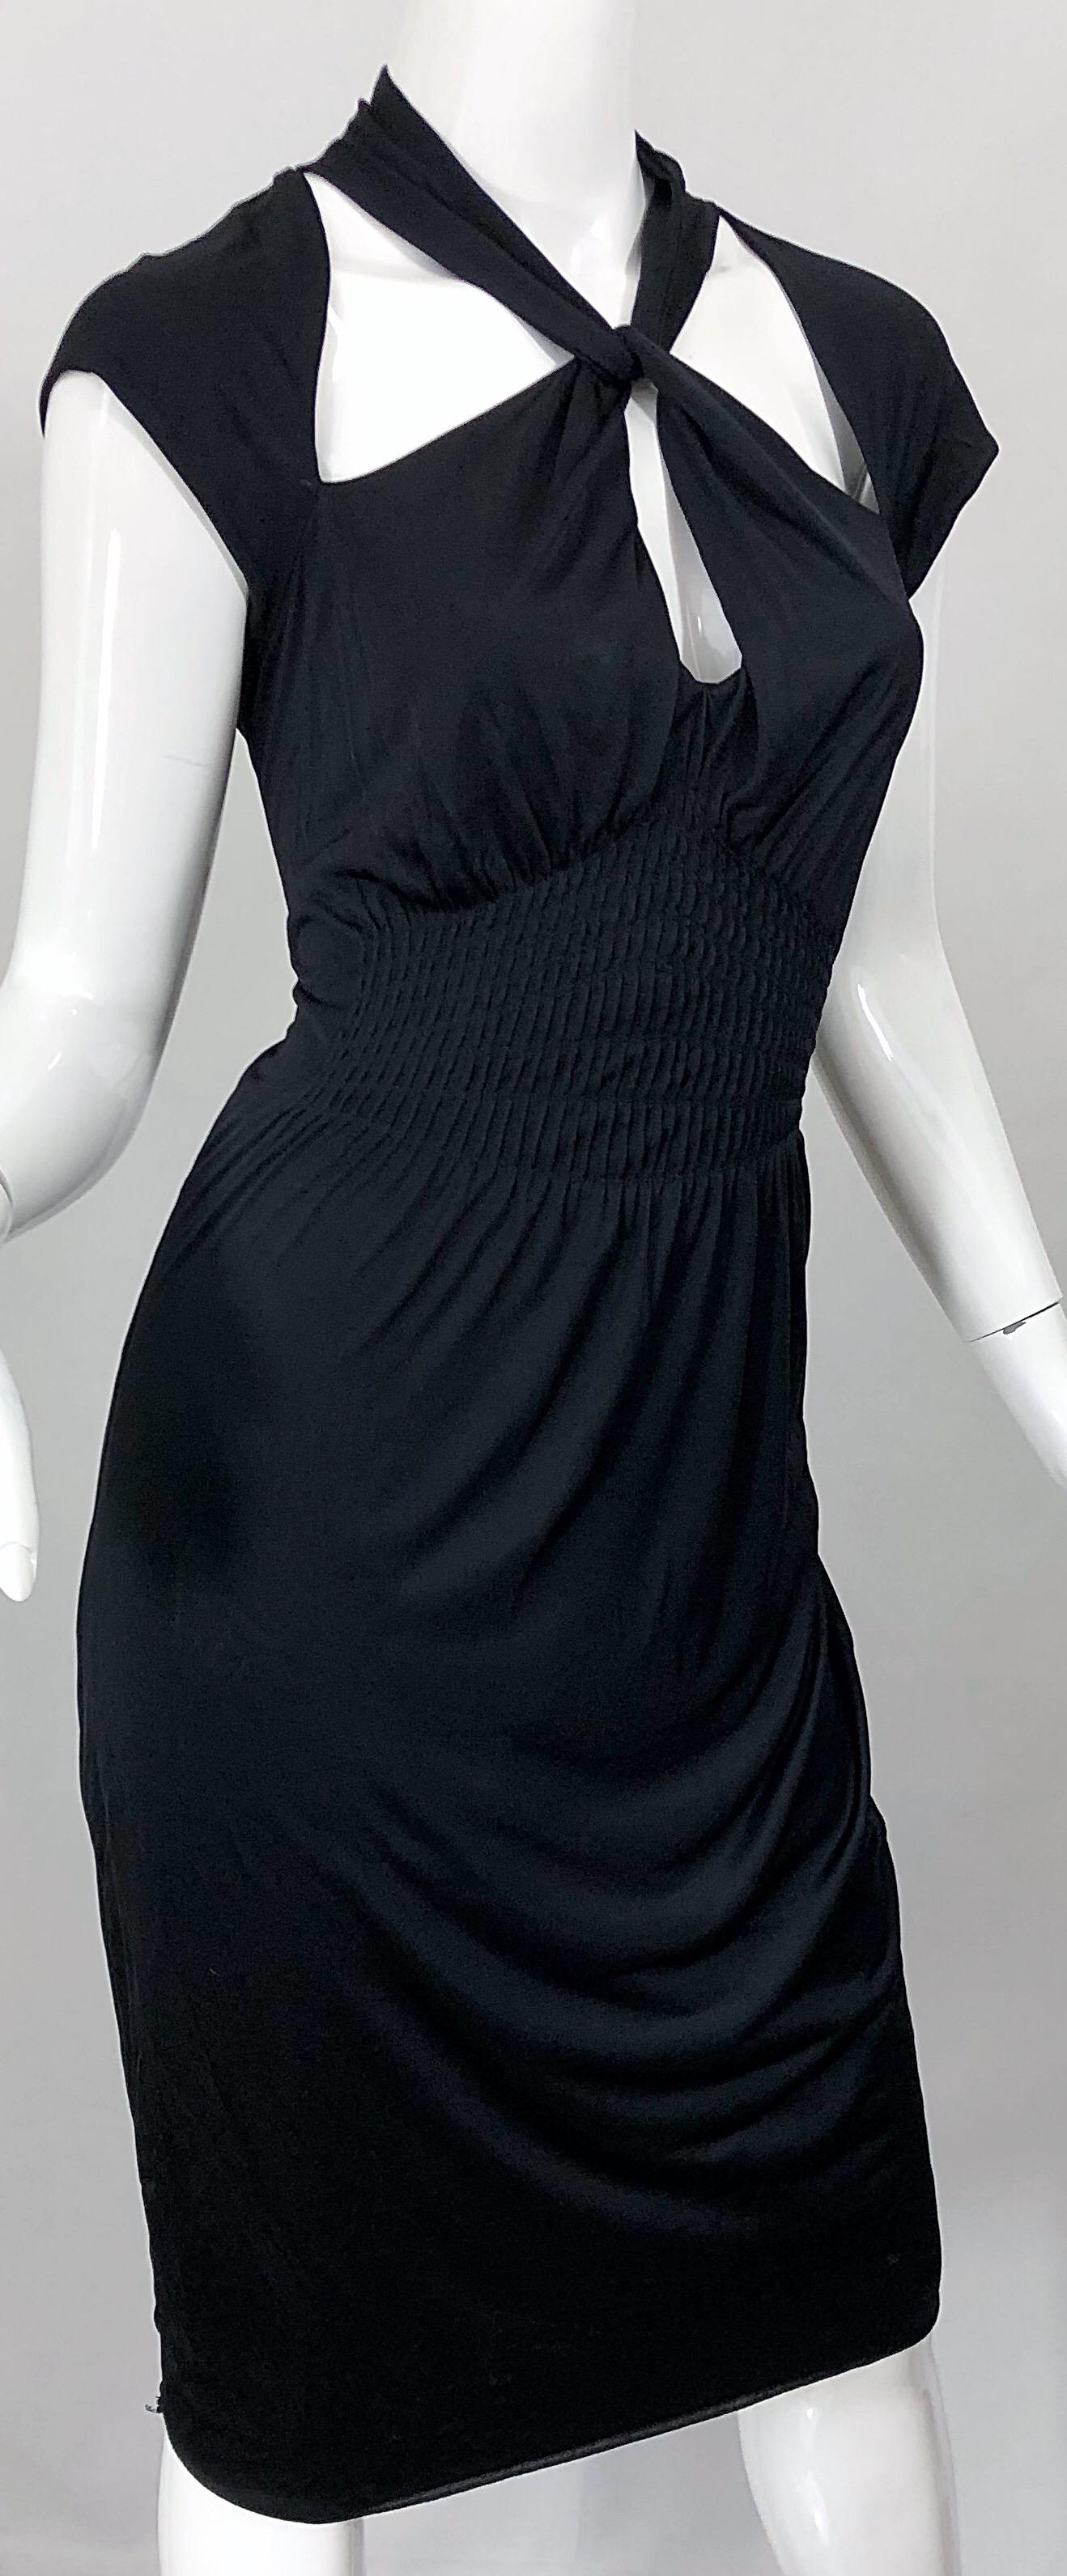 Gucci Tom Ford Fall 2003 Runway Black Cut Out Backless Stretch Jersey Dress  3